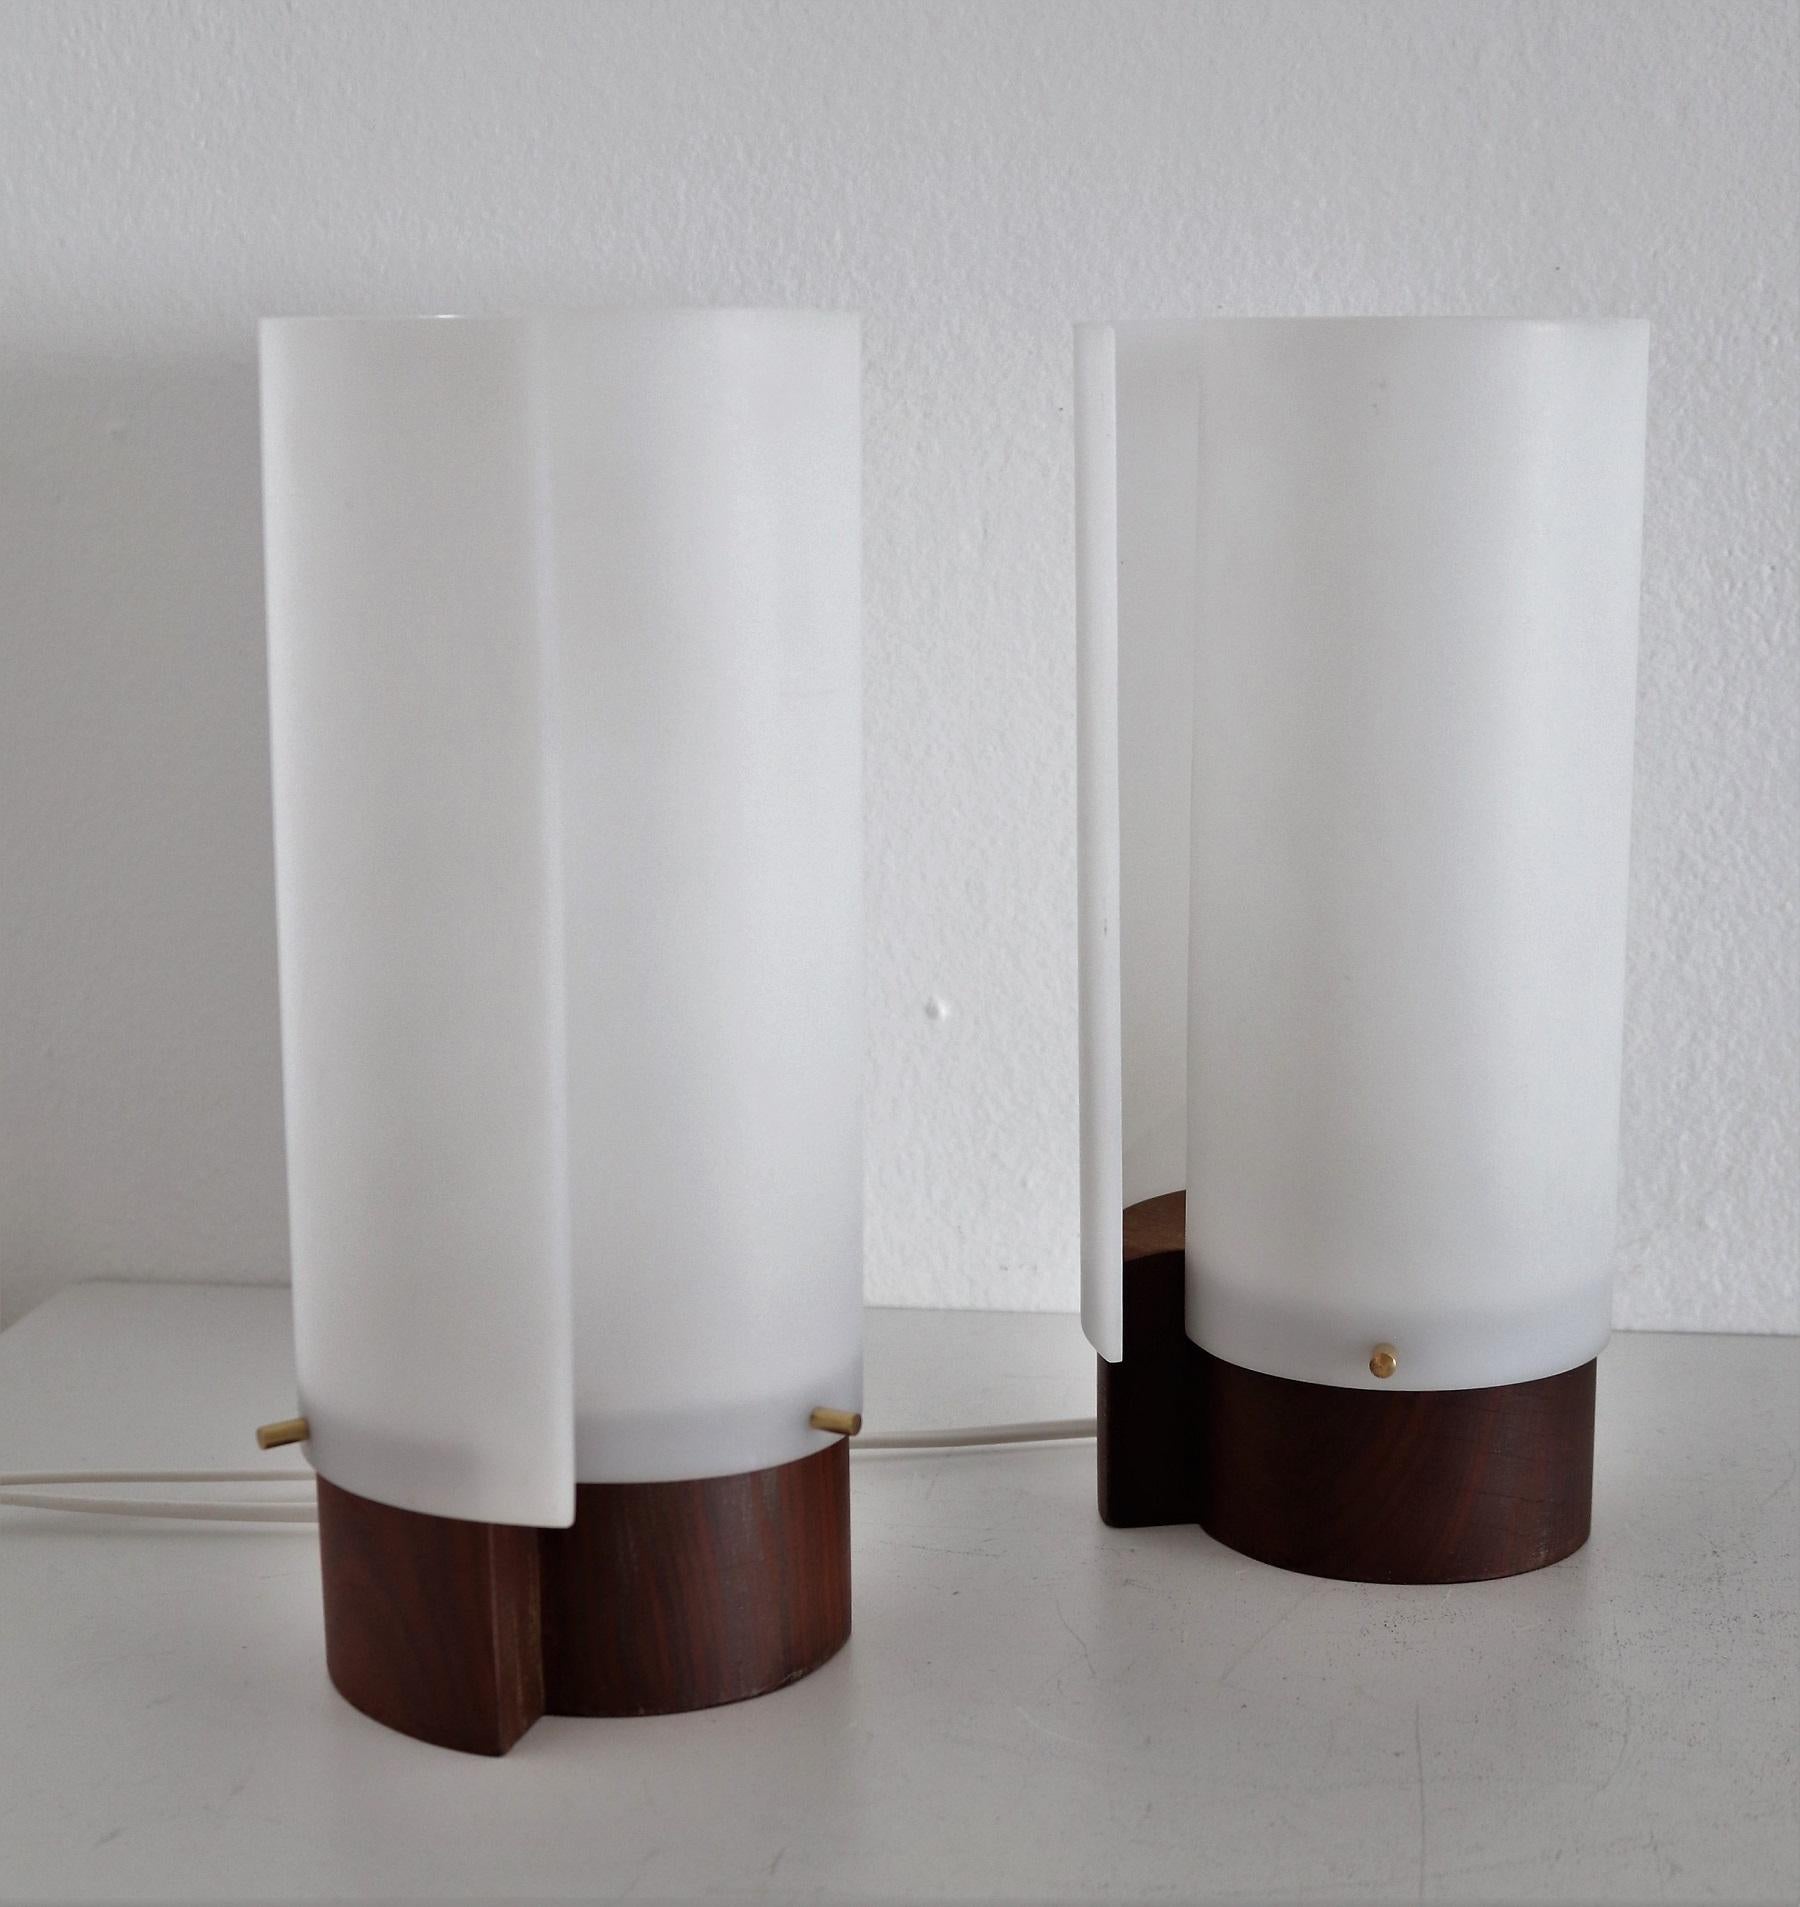 Mid-Century Modern Italian Modernist Teakwood Table Lamps with Methacrylic Curved Shades, 1950s For Sale